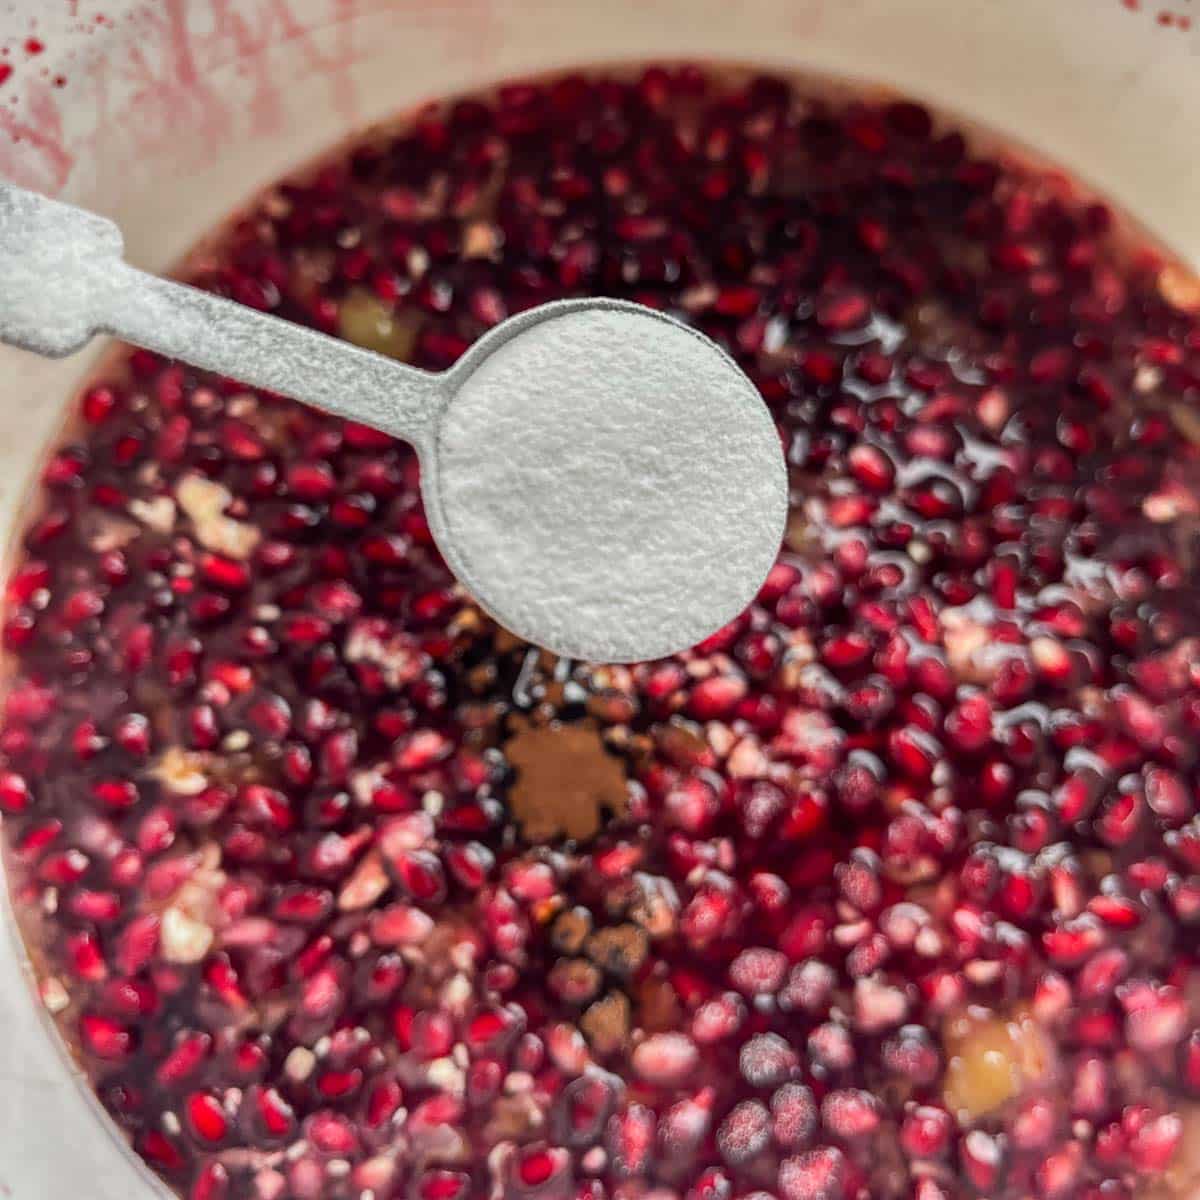 adding chemicals to pomegranate wine must